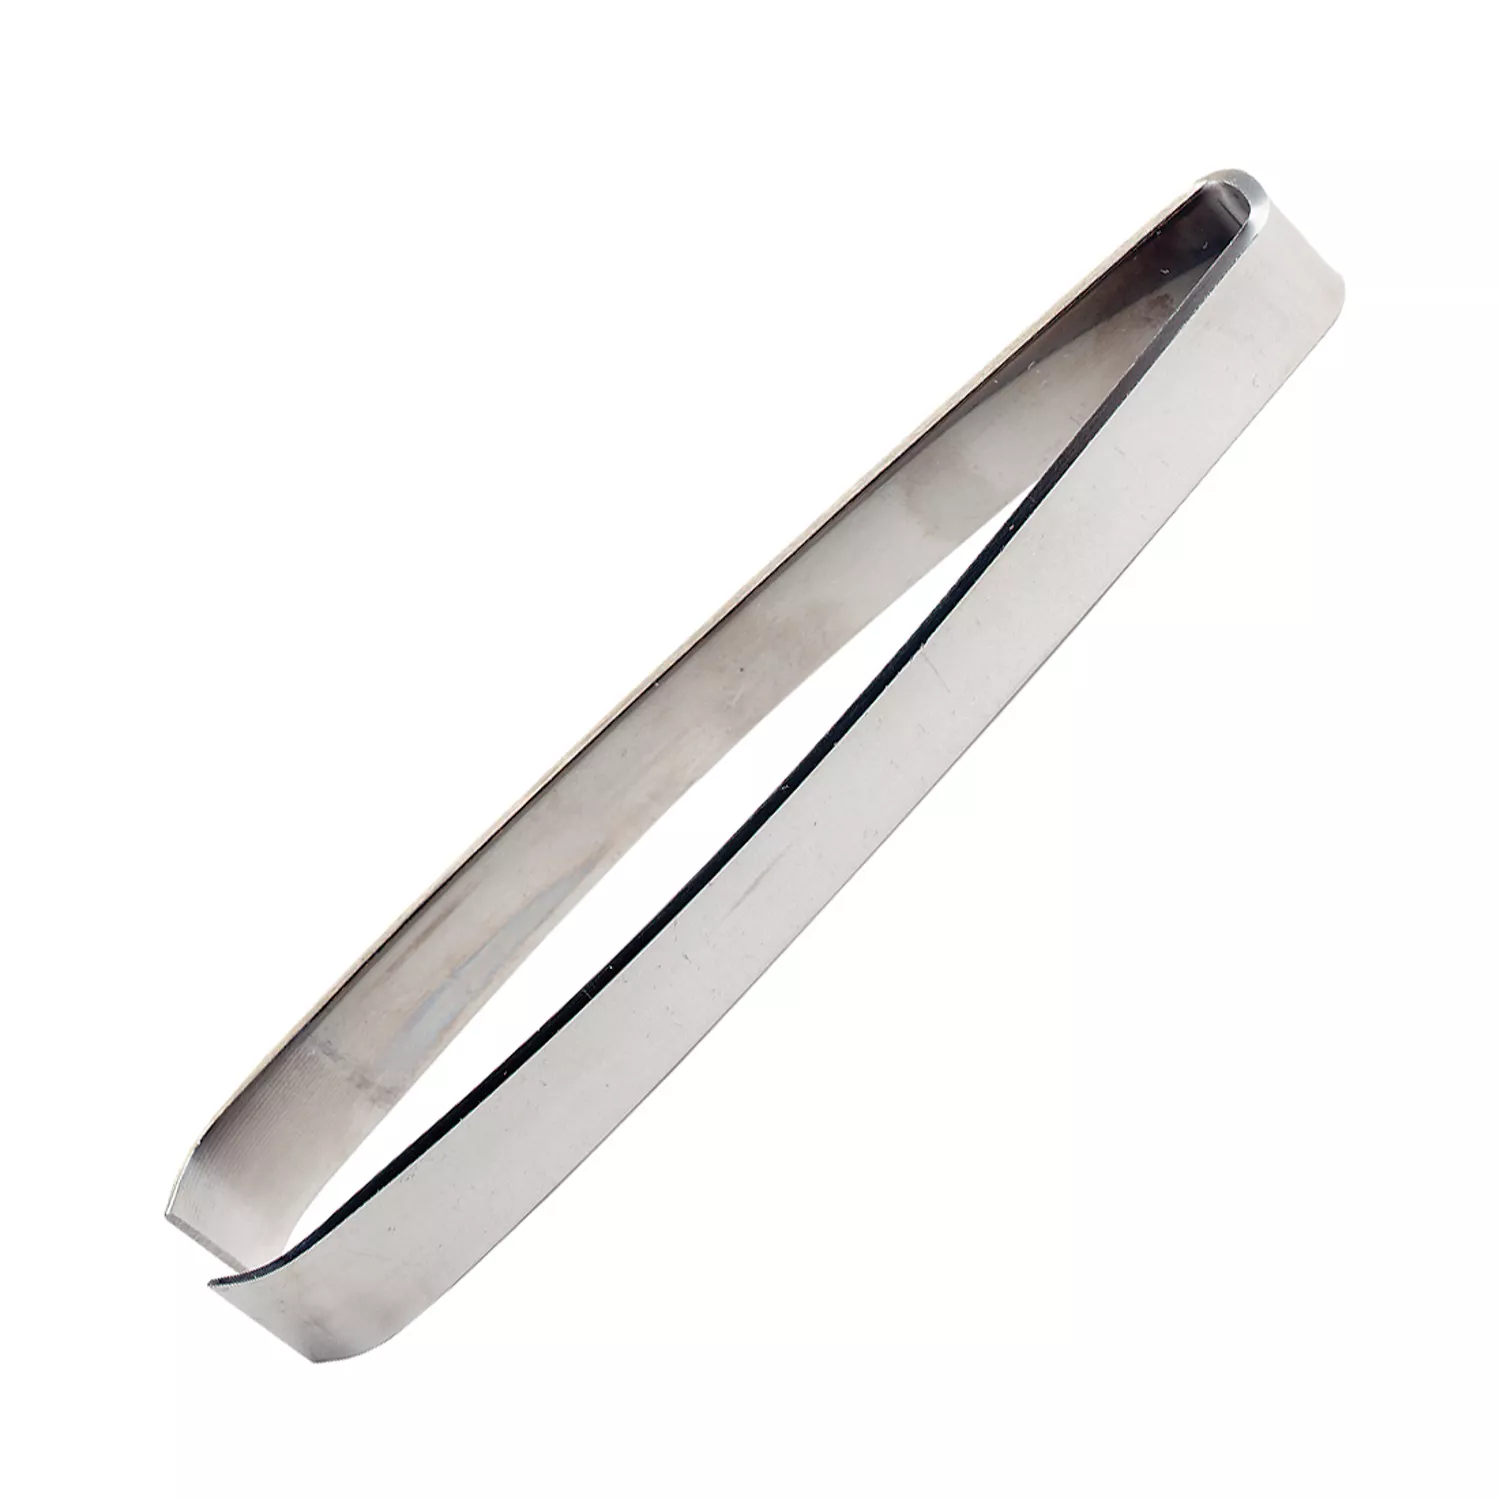 Sur La Table Stainless Steel Fish Turner, Silver